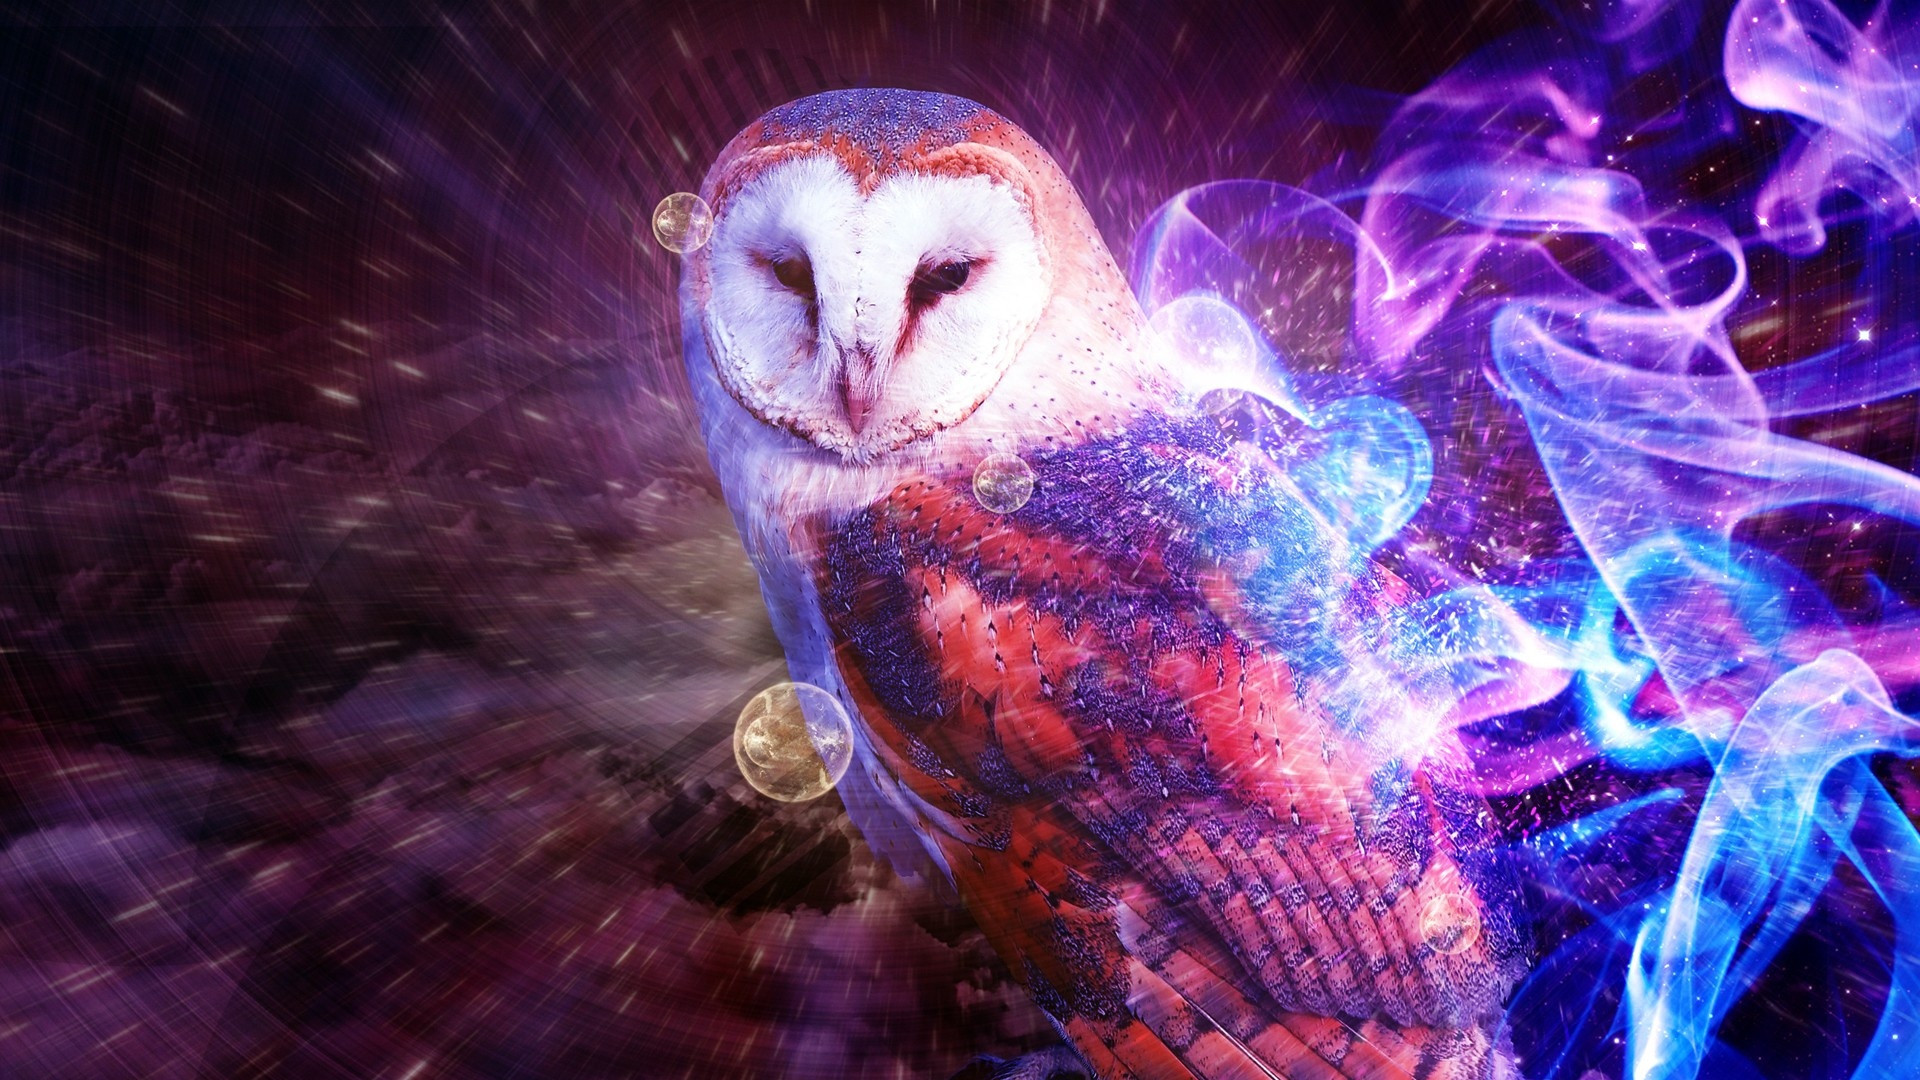 Some Trippy Owl Thing Wallpaper Pictures